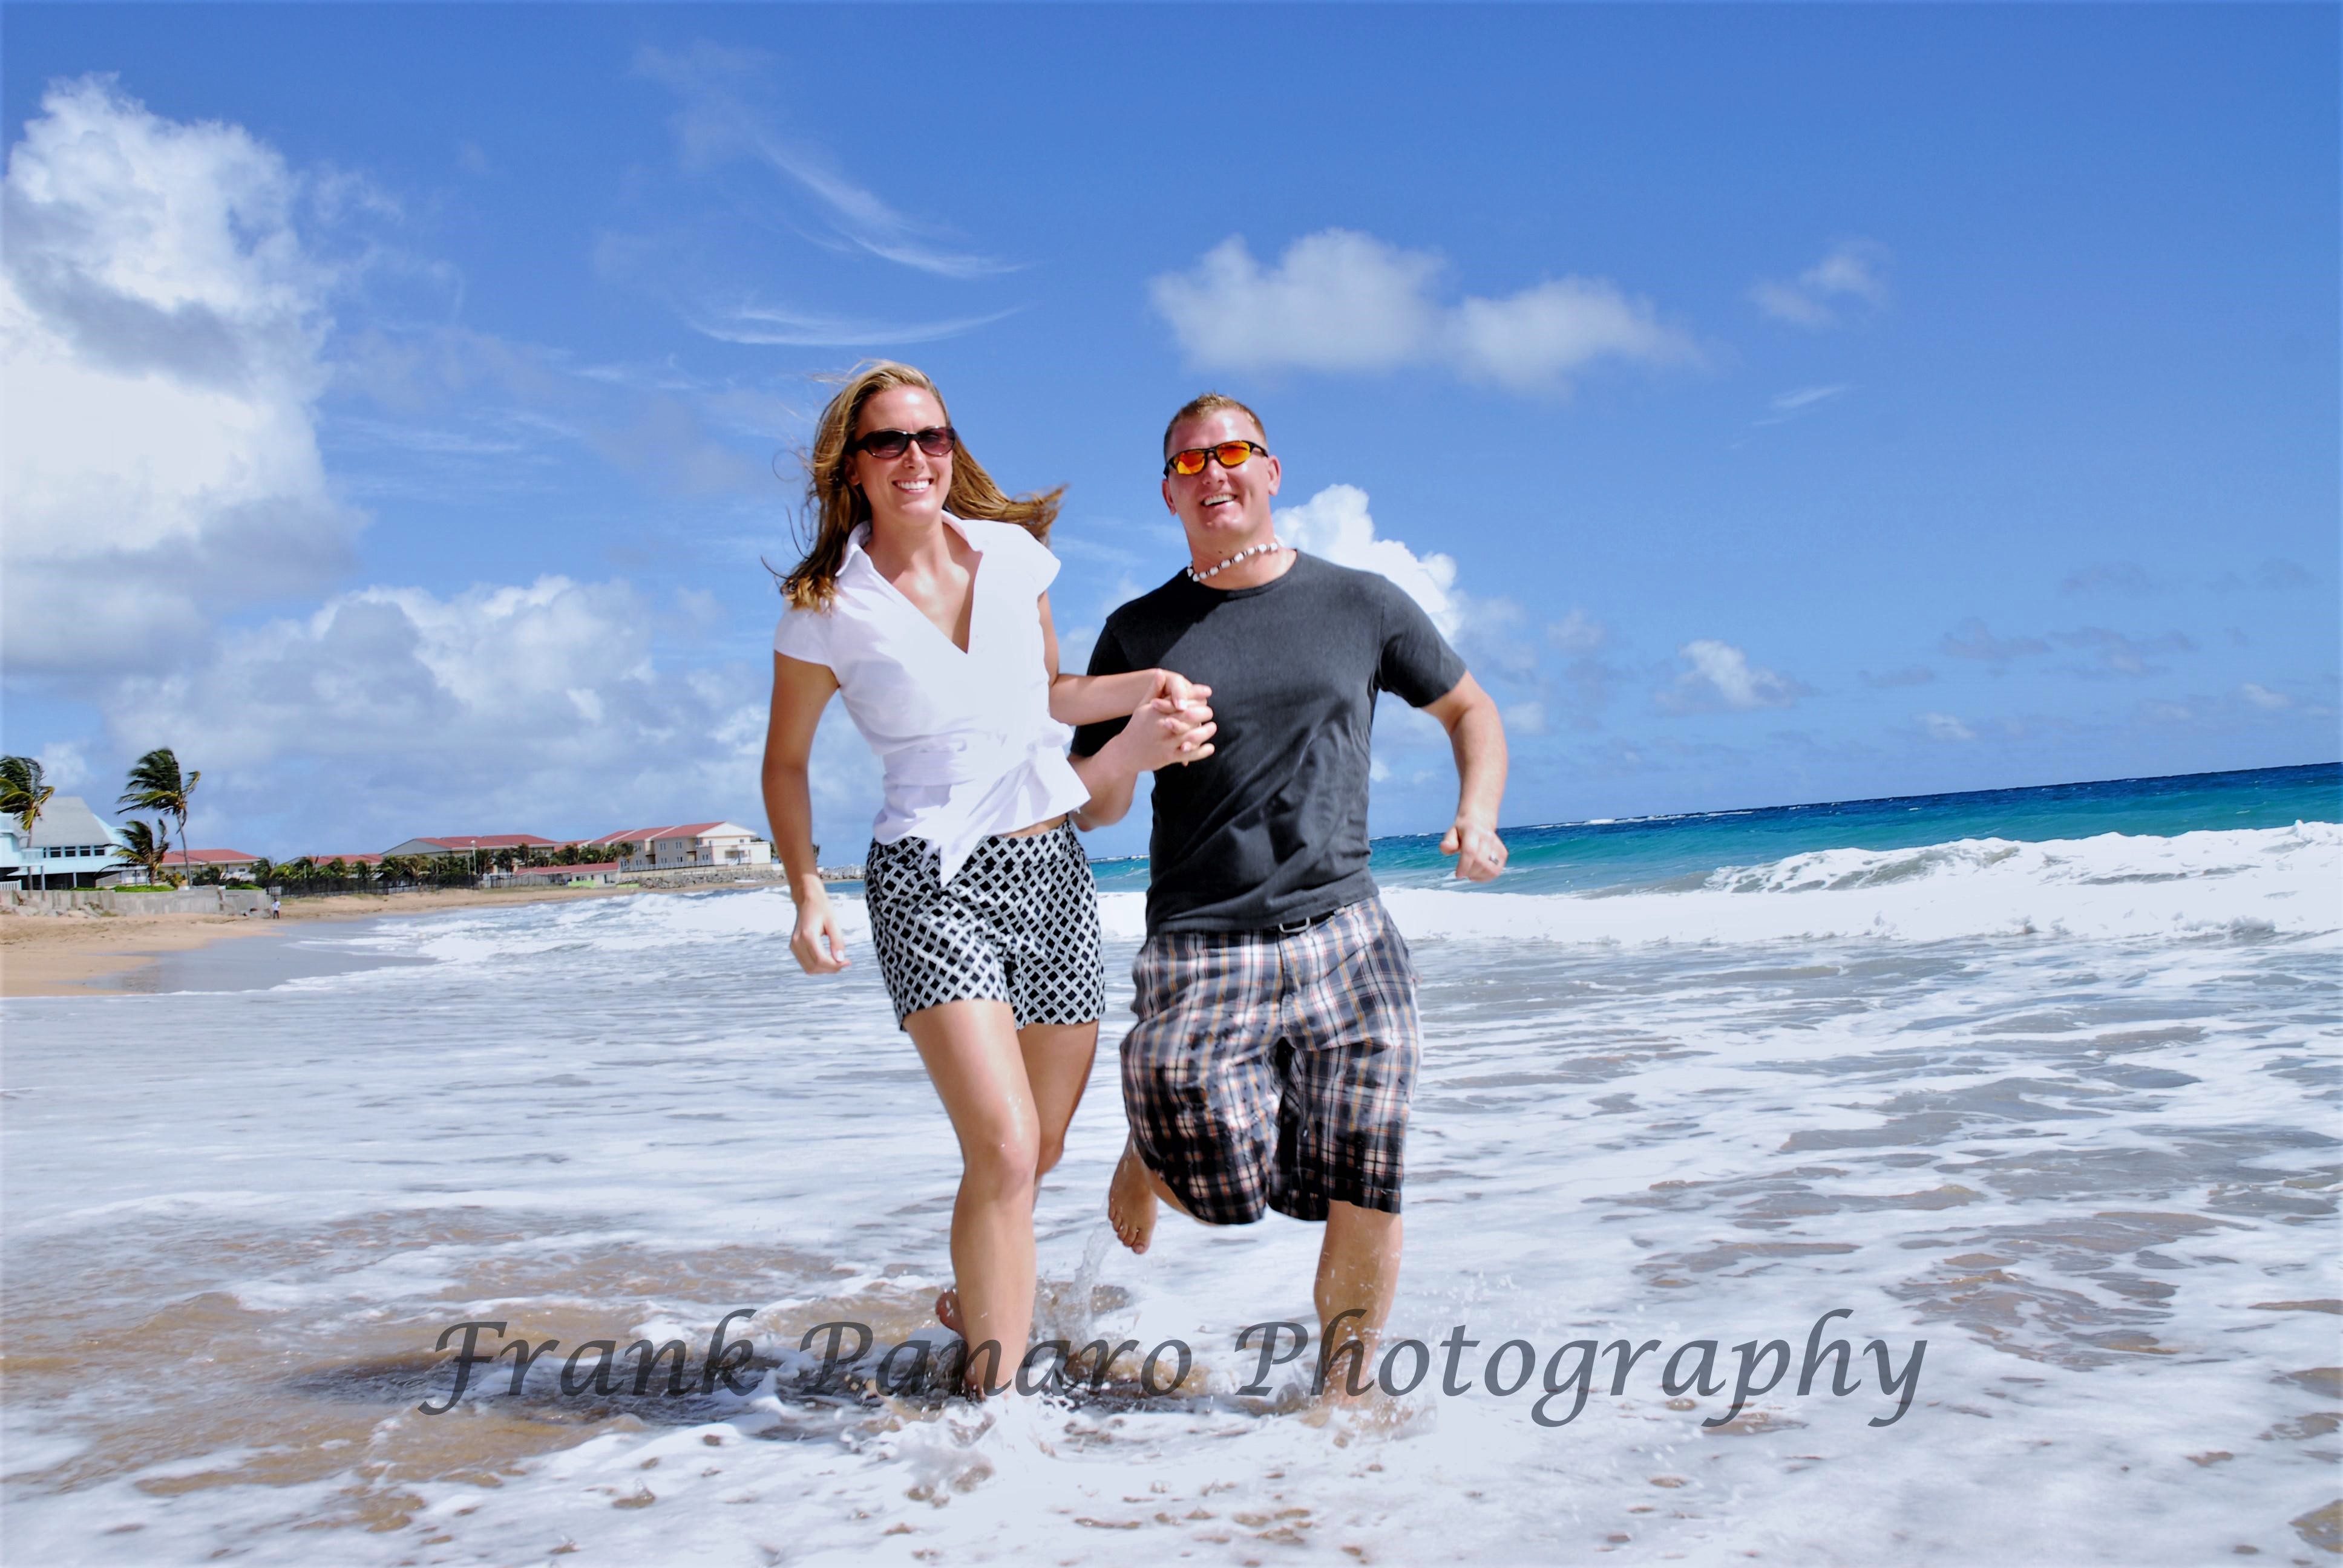 St. Croix Wedding and Event Photographers